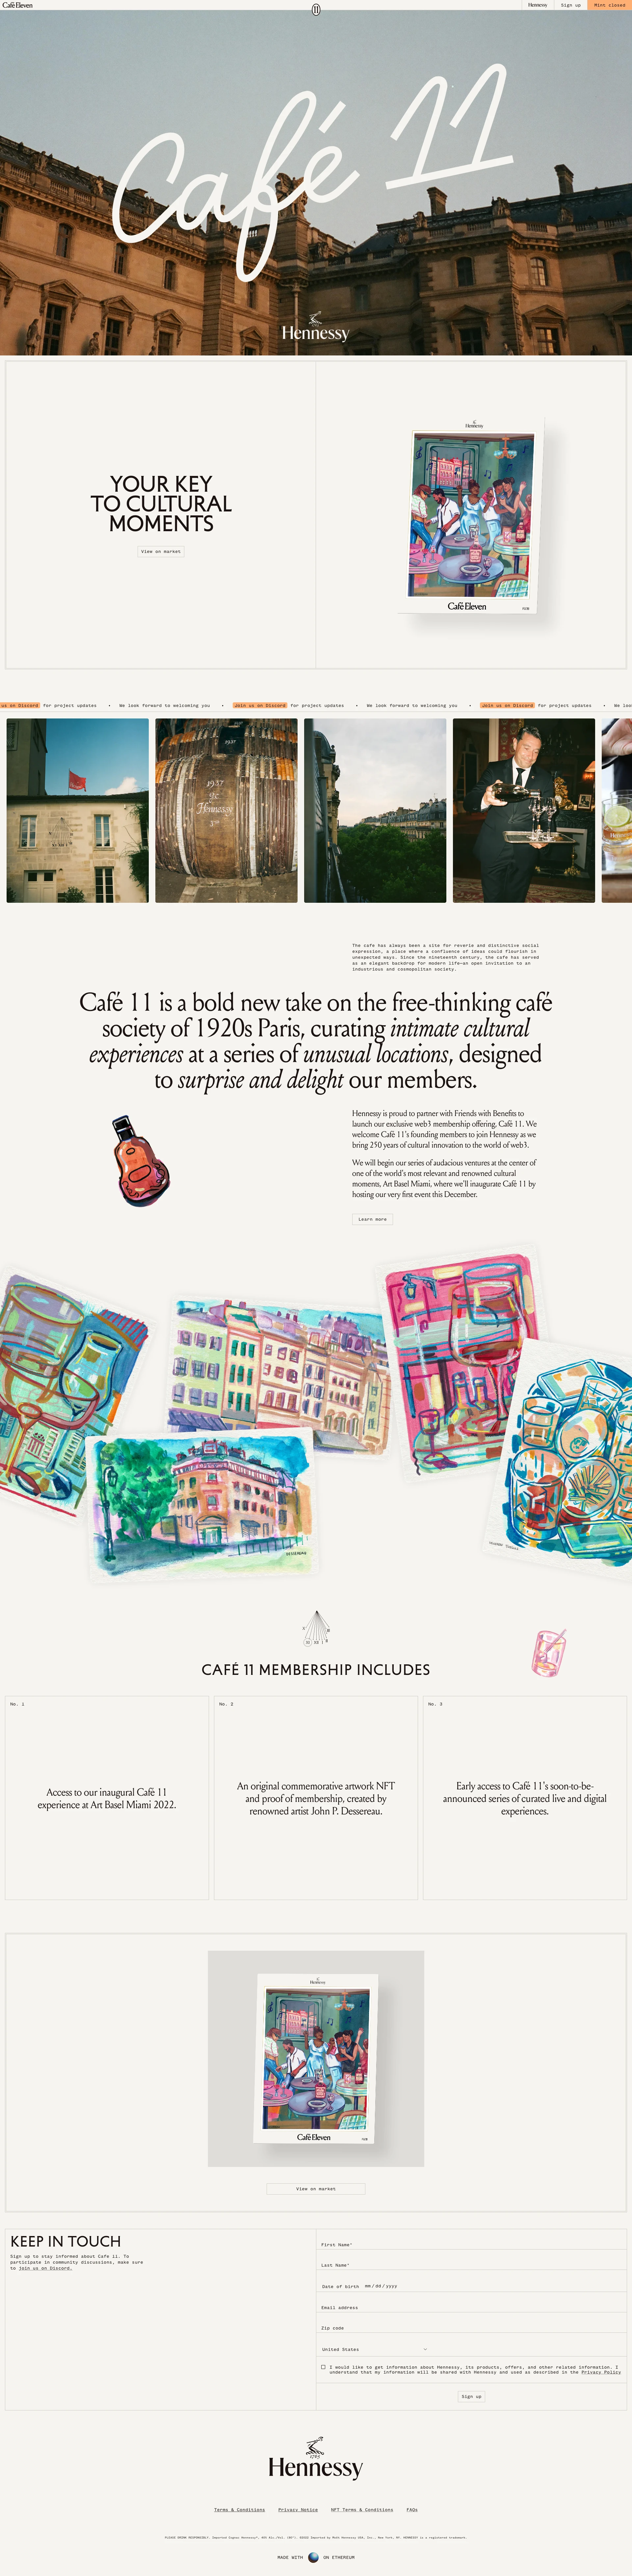 Café Eleven Landing Page Example: Discover the Cafe 11 NFT collection. Your Key to Cultural Moments brought to you by Hennessy and Friends with Benefits.